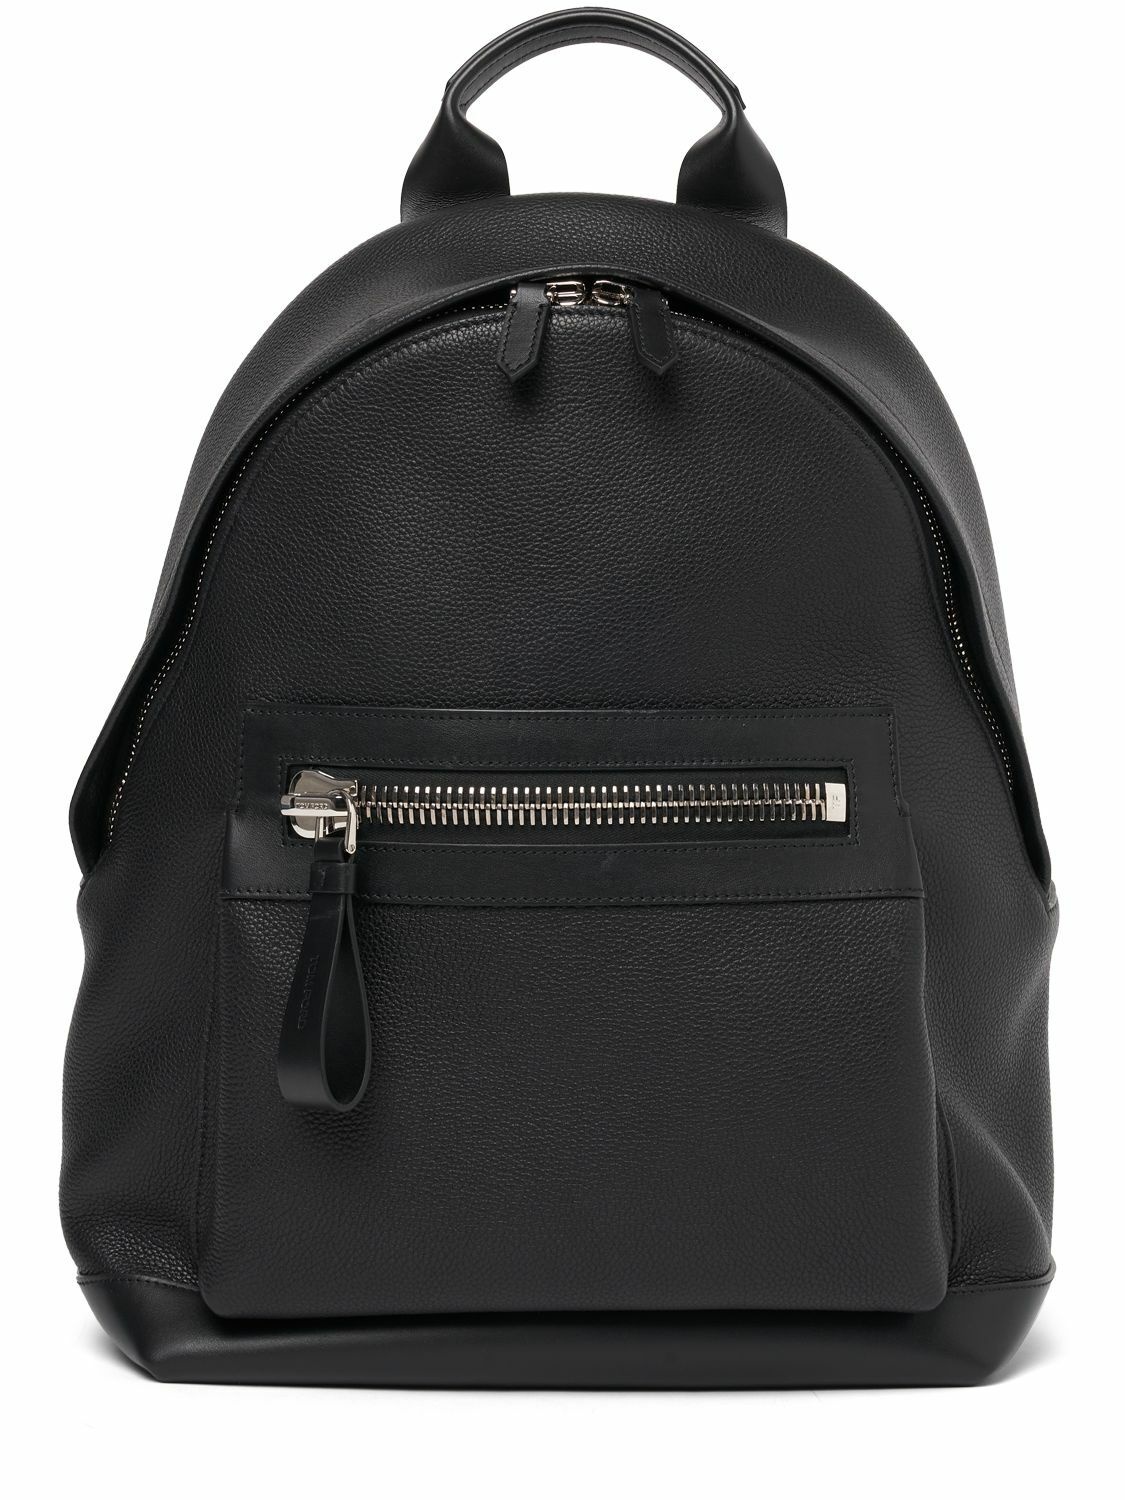 Photo: TOM FORD - Buckley Soft Grain Leather Backpack